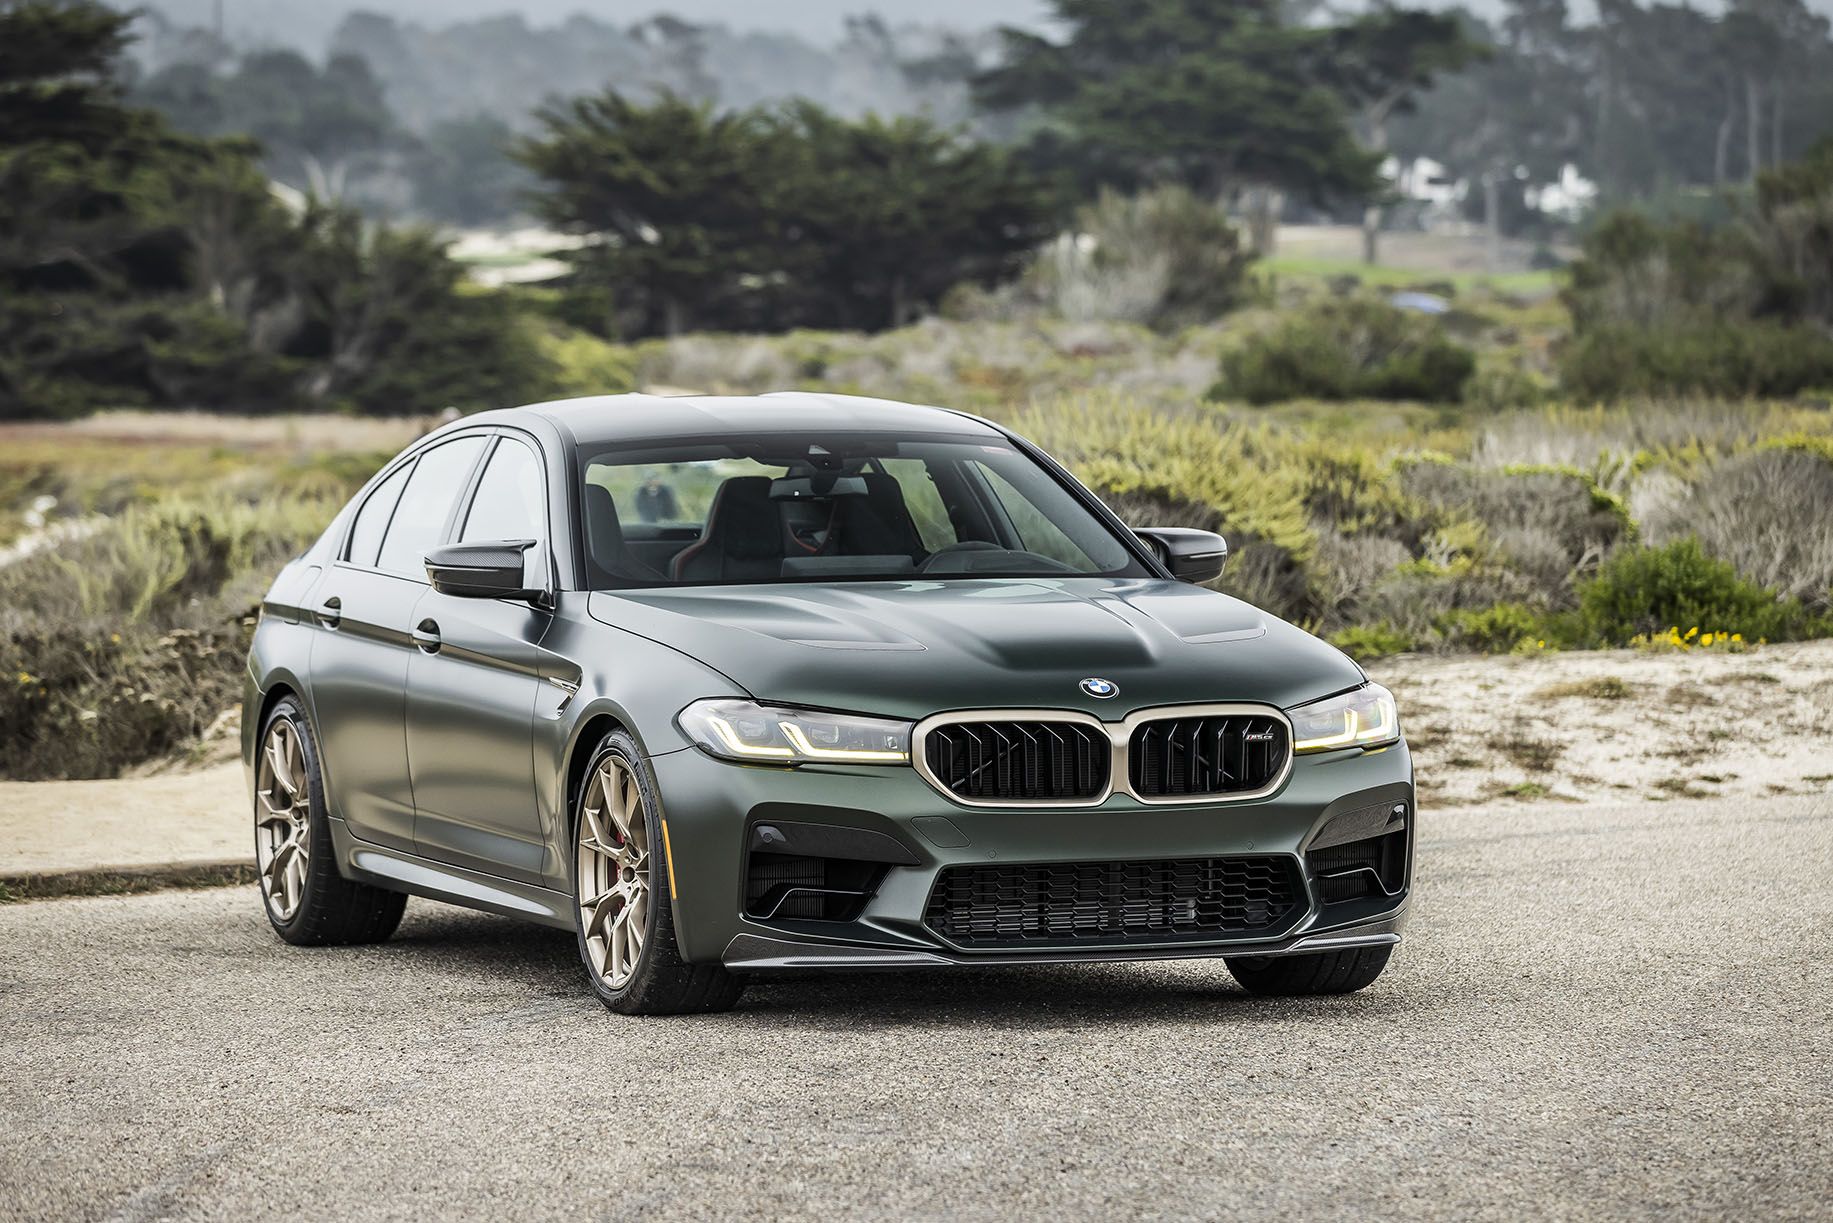 BMW M5 Touring Is For Petrolhead Soccer Dads Who Dislike Fast SUVs